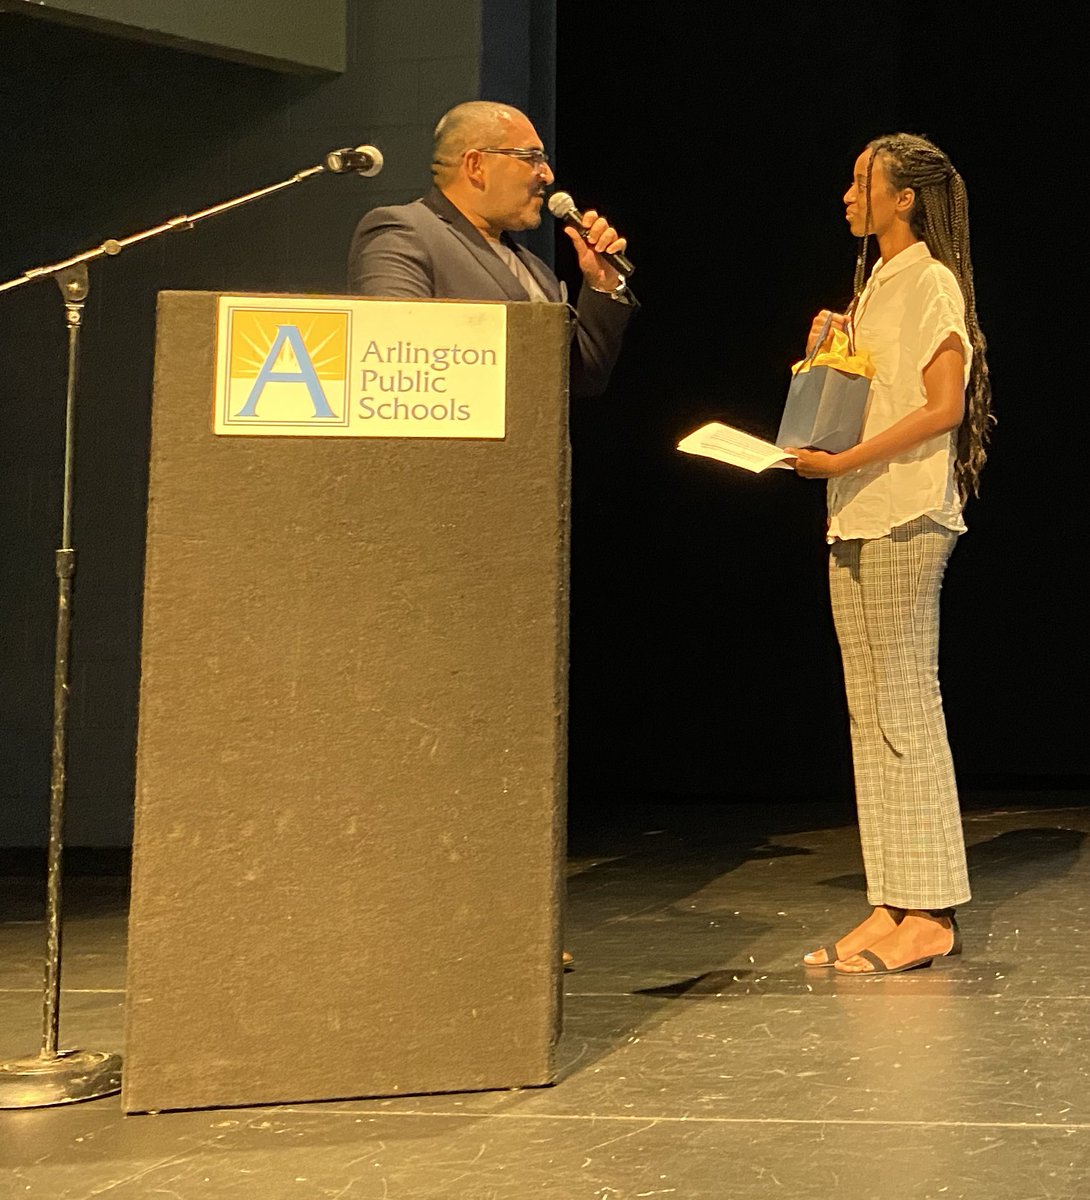 Thank you to Washington-Liberty student Liya for sharing remarks on how administrators and teachers can support students, especially students from diverse, so they can excel and succeed in school! <a target='_blank' href='http://search.twitter.com/search?q=EveryAPSStudent'><a target='_blank' href='https://twitter.com/hashtag/EveryAPSStudent?src=hash'>#EveryAPSStudent</a></a> <a target='_blank' href='http://twitter.com/GeneralsPride'>@GeneralsPride</a> <a target='_blank' href='https://t.co/wP0T2Cr4Vz'>https://t.co/wP0T2Cr4Vz</a>